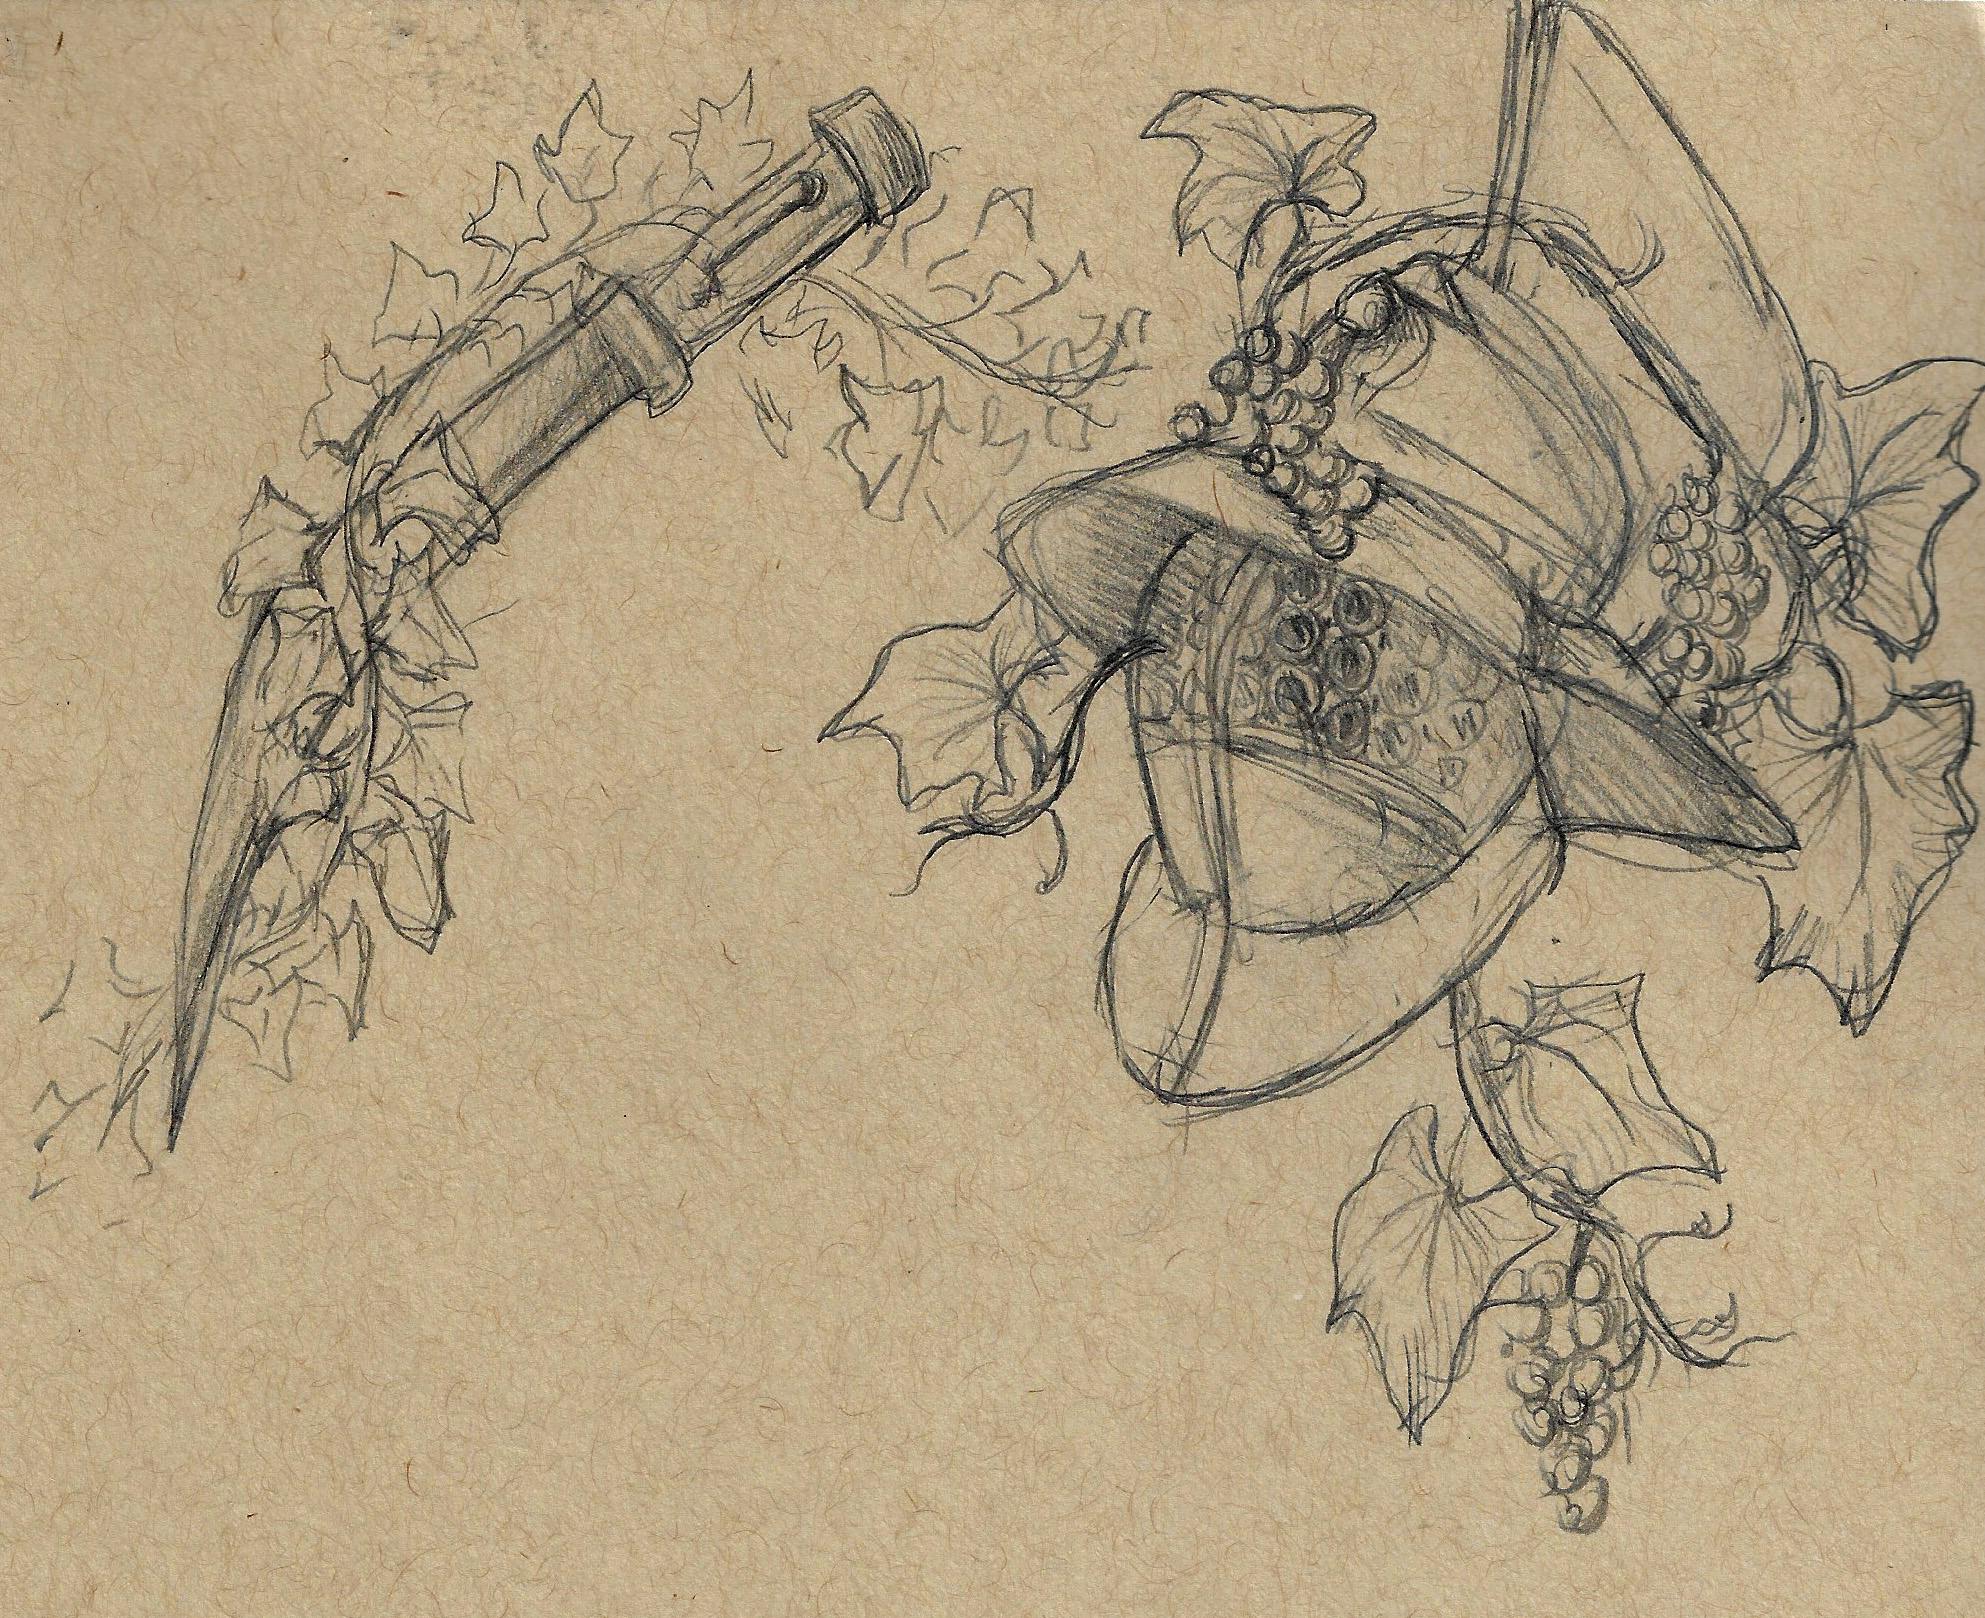 sketch of gladiator sword and helmet being overcome by vines